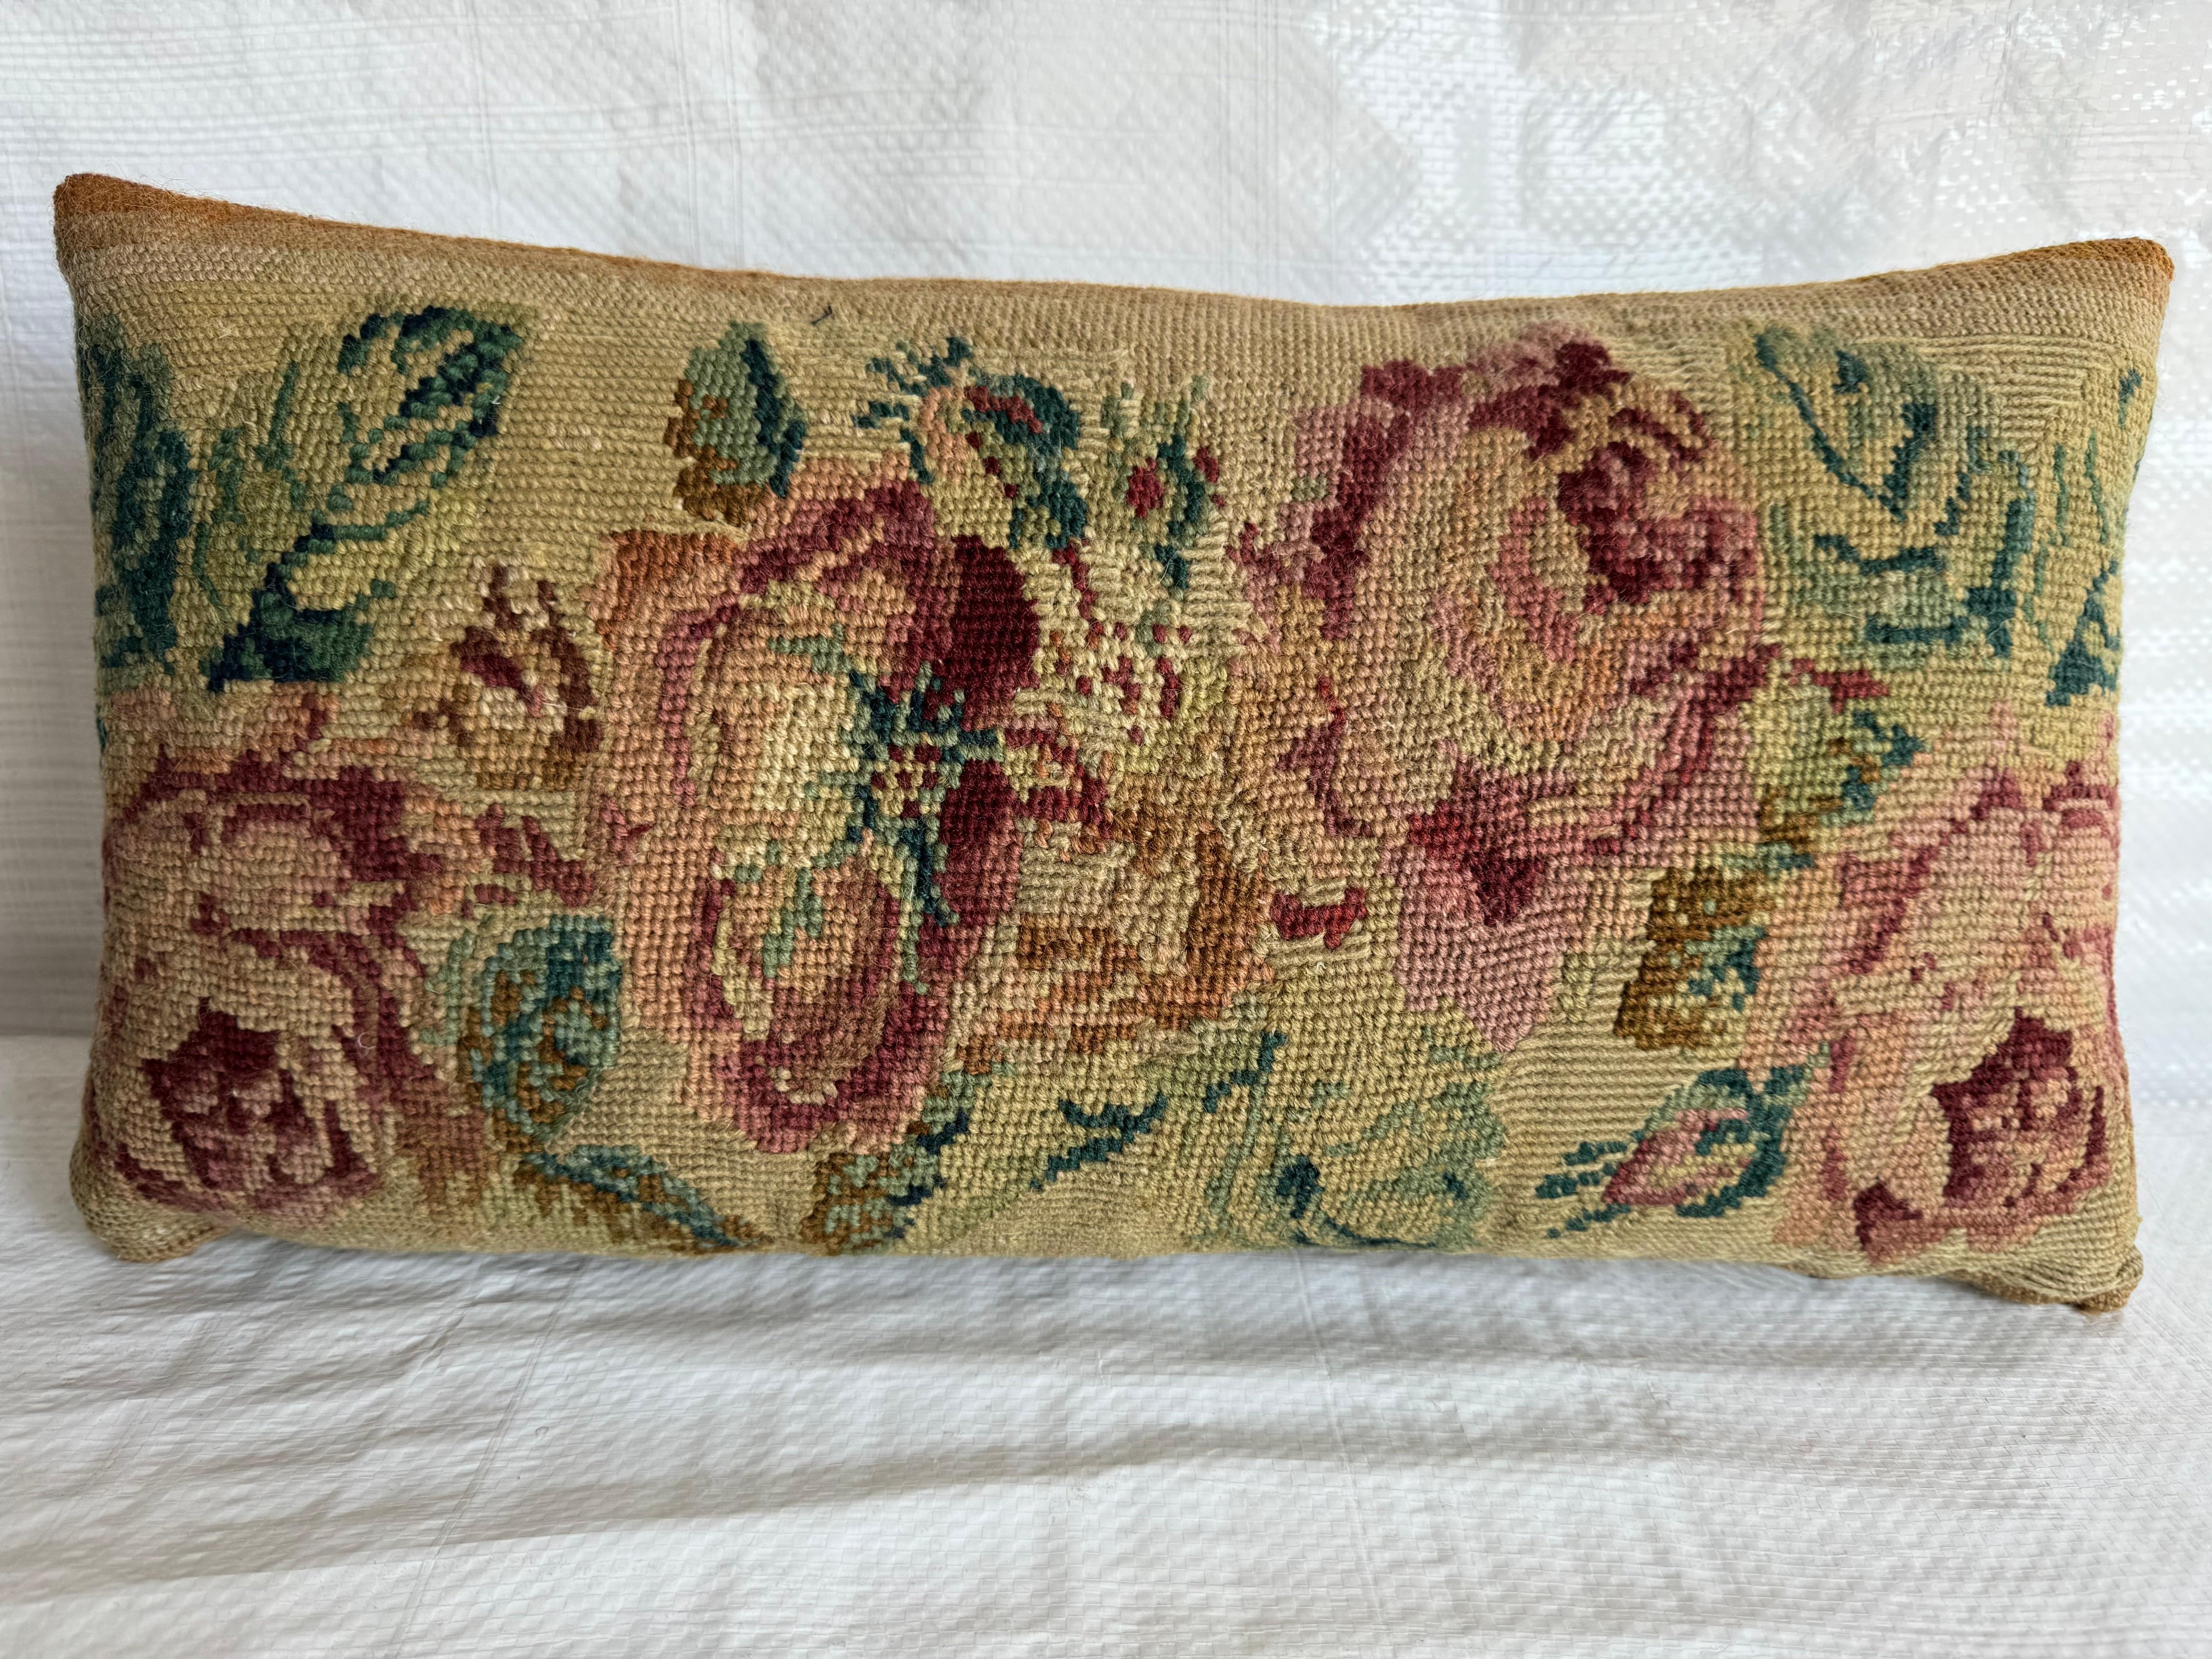 Uncover the refined beauty of yesteryear with our exquisite 1851 English Needlework Pillow, measuring 19